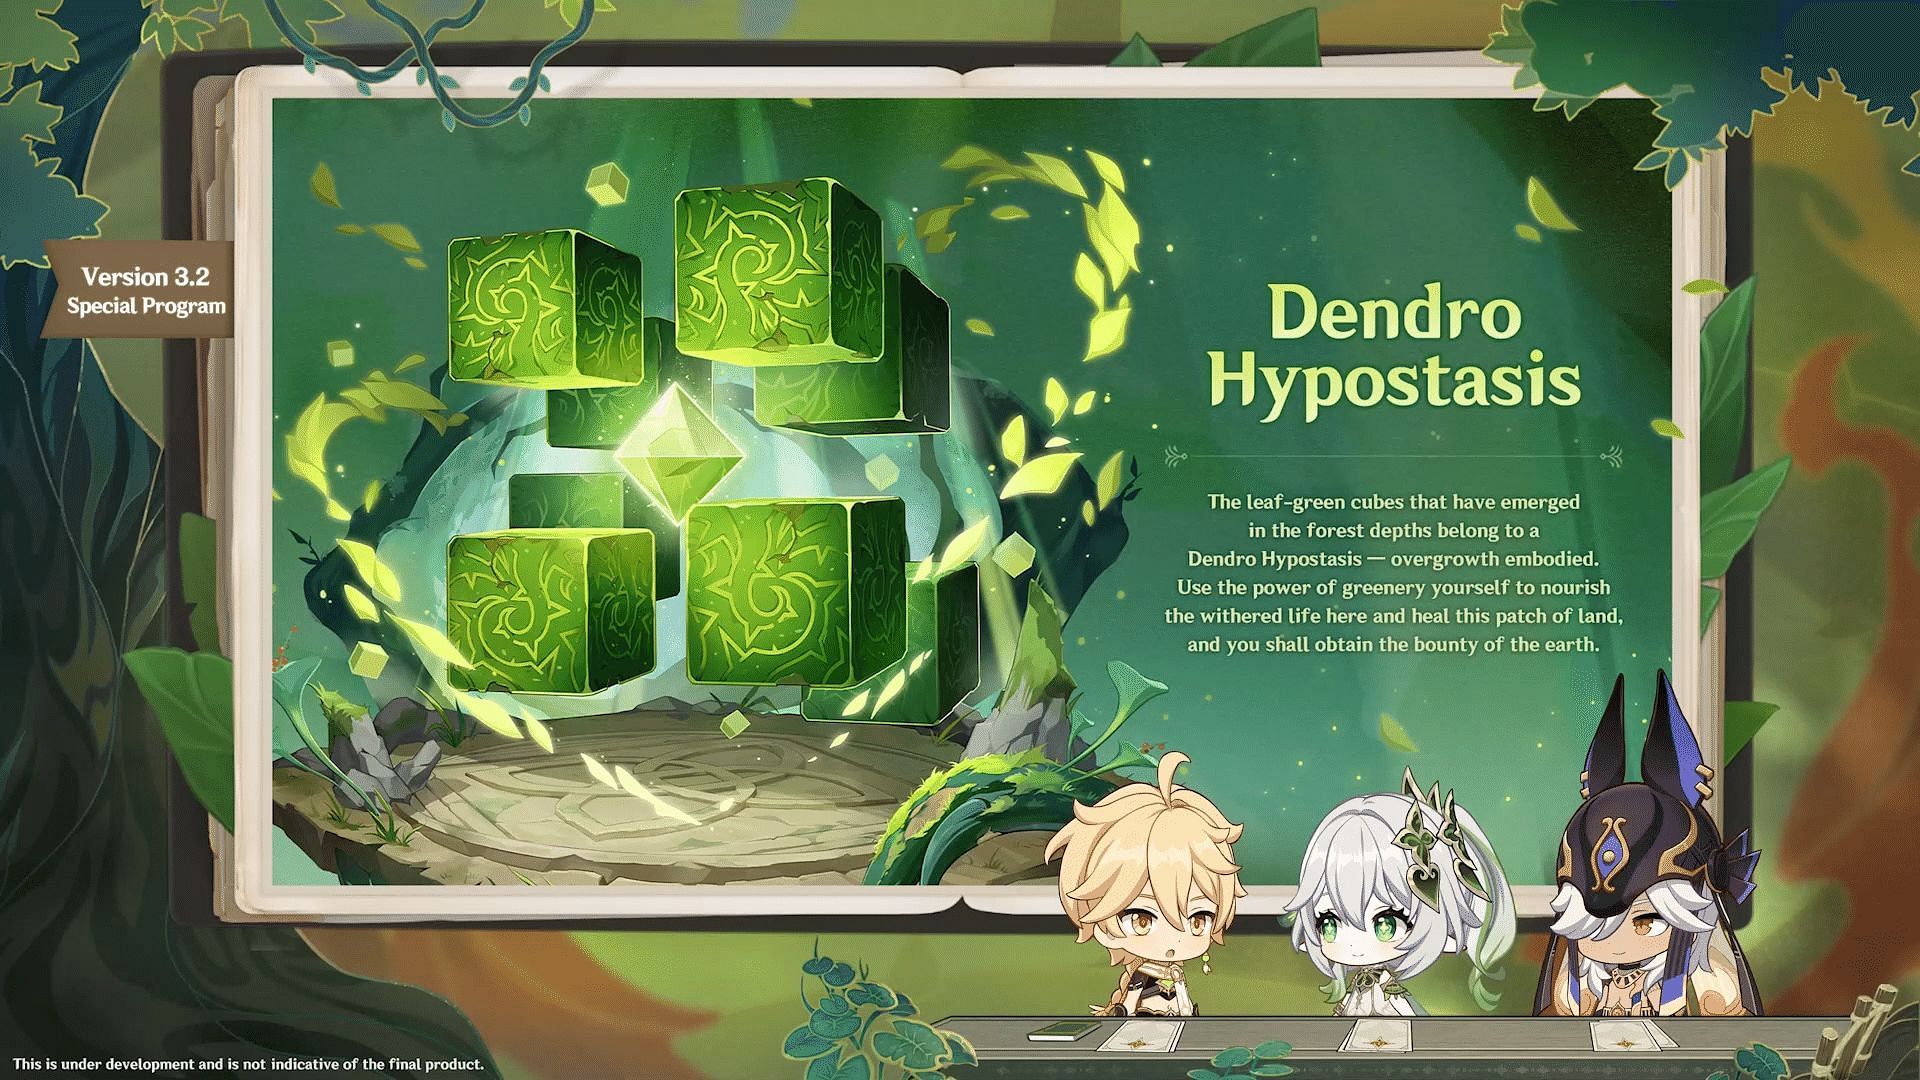 Dendro Hypostasis will be available in version 3.2 (Image via HoYoverse)